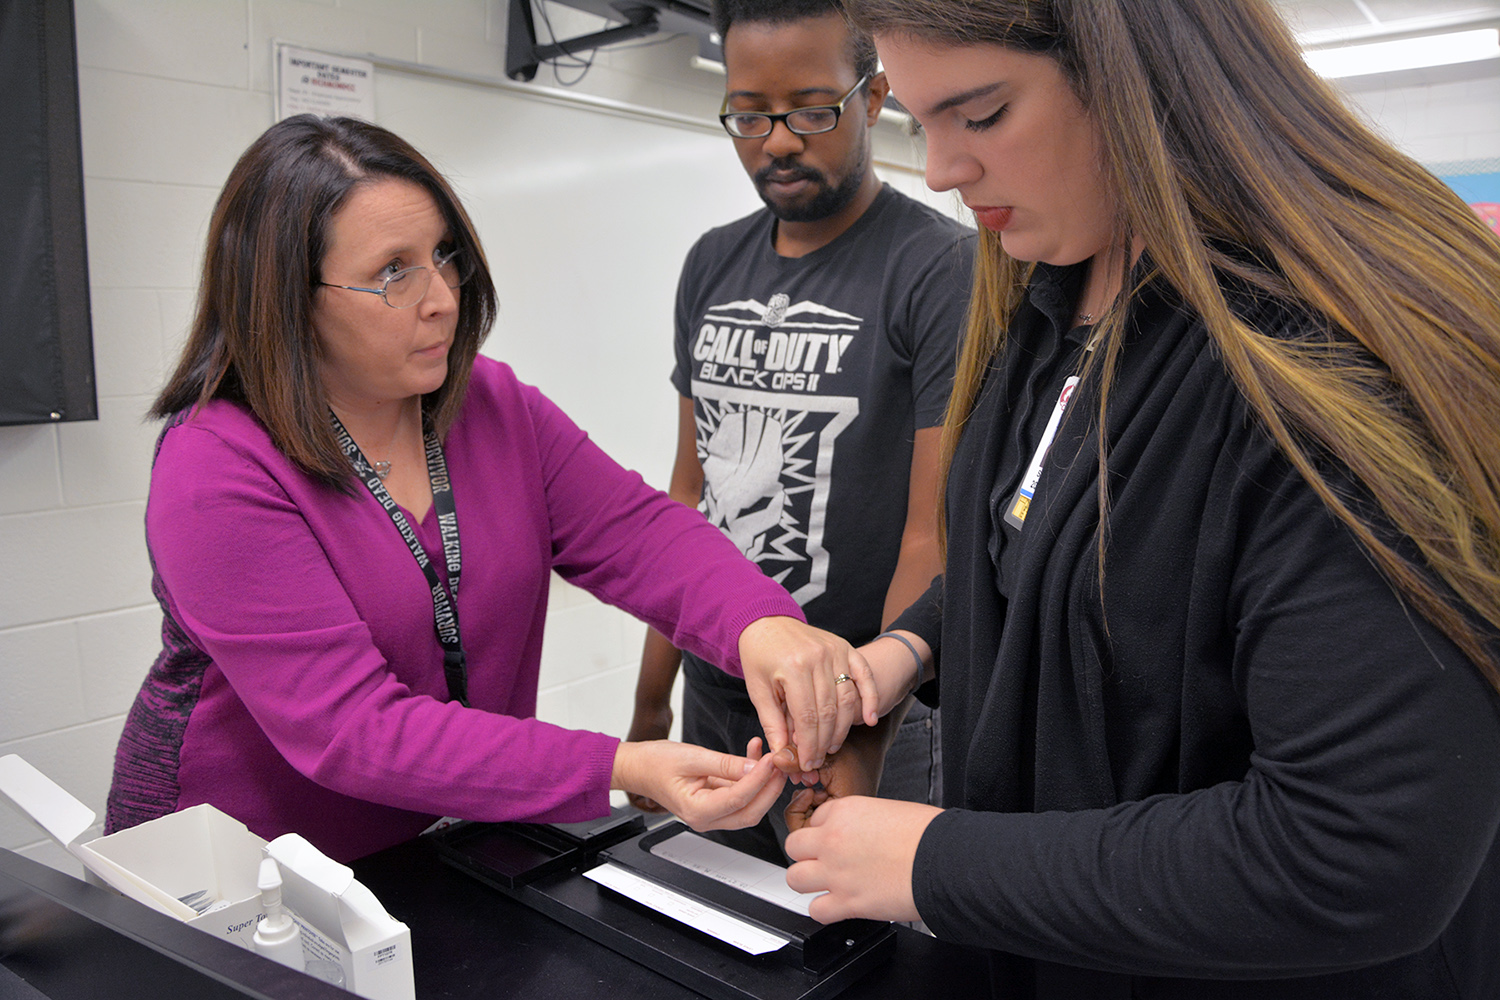 Criminal Justice instructor Robin Smith helping students with fingerprinting lesson